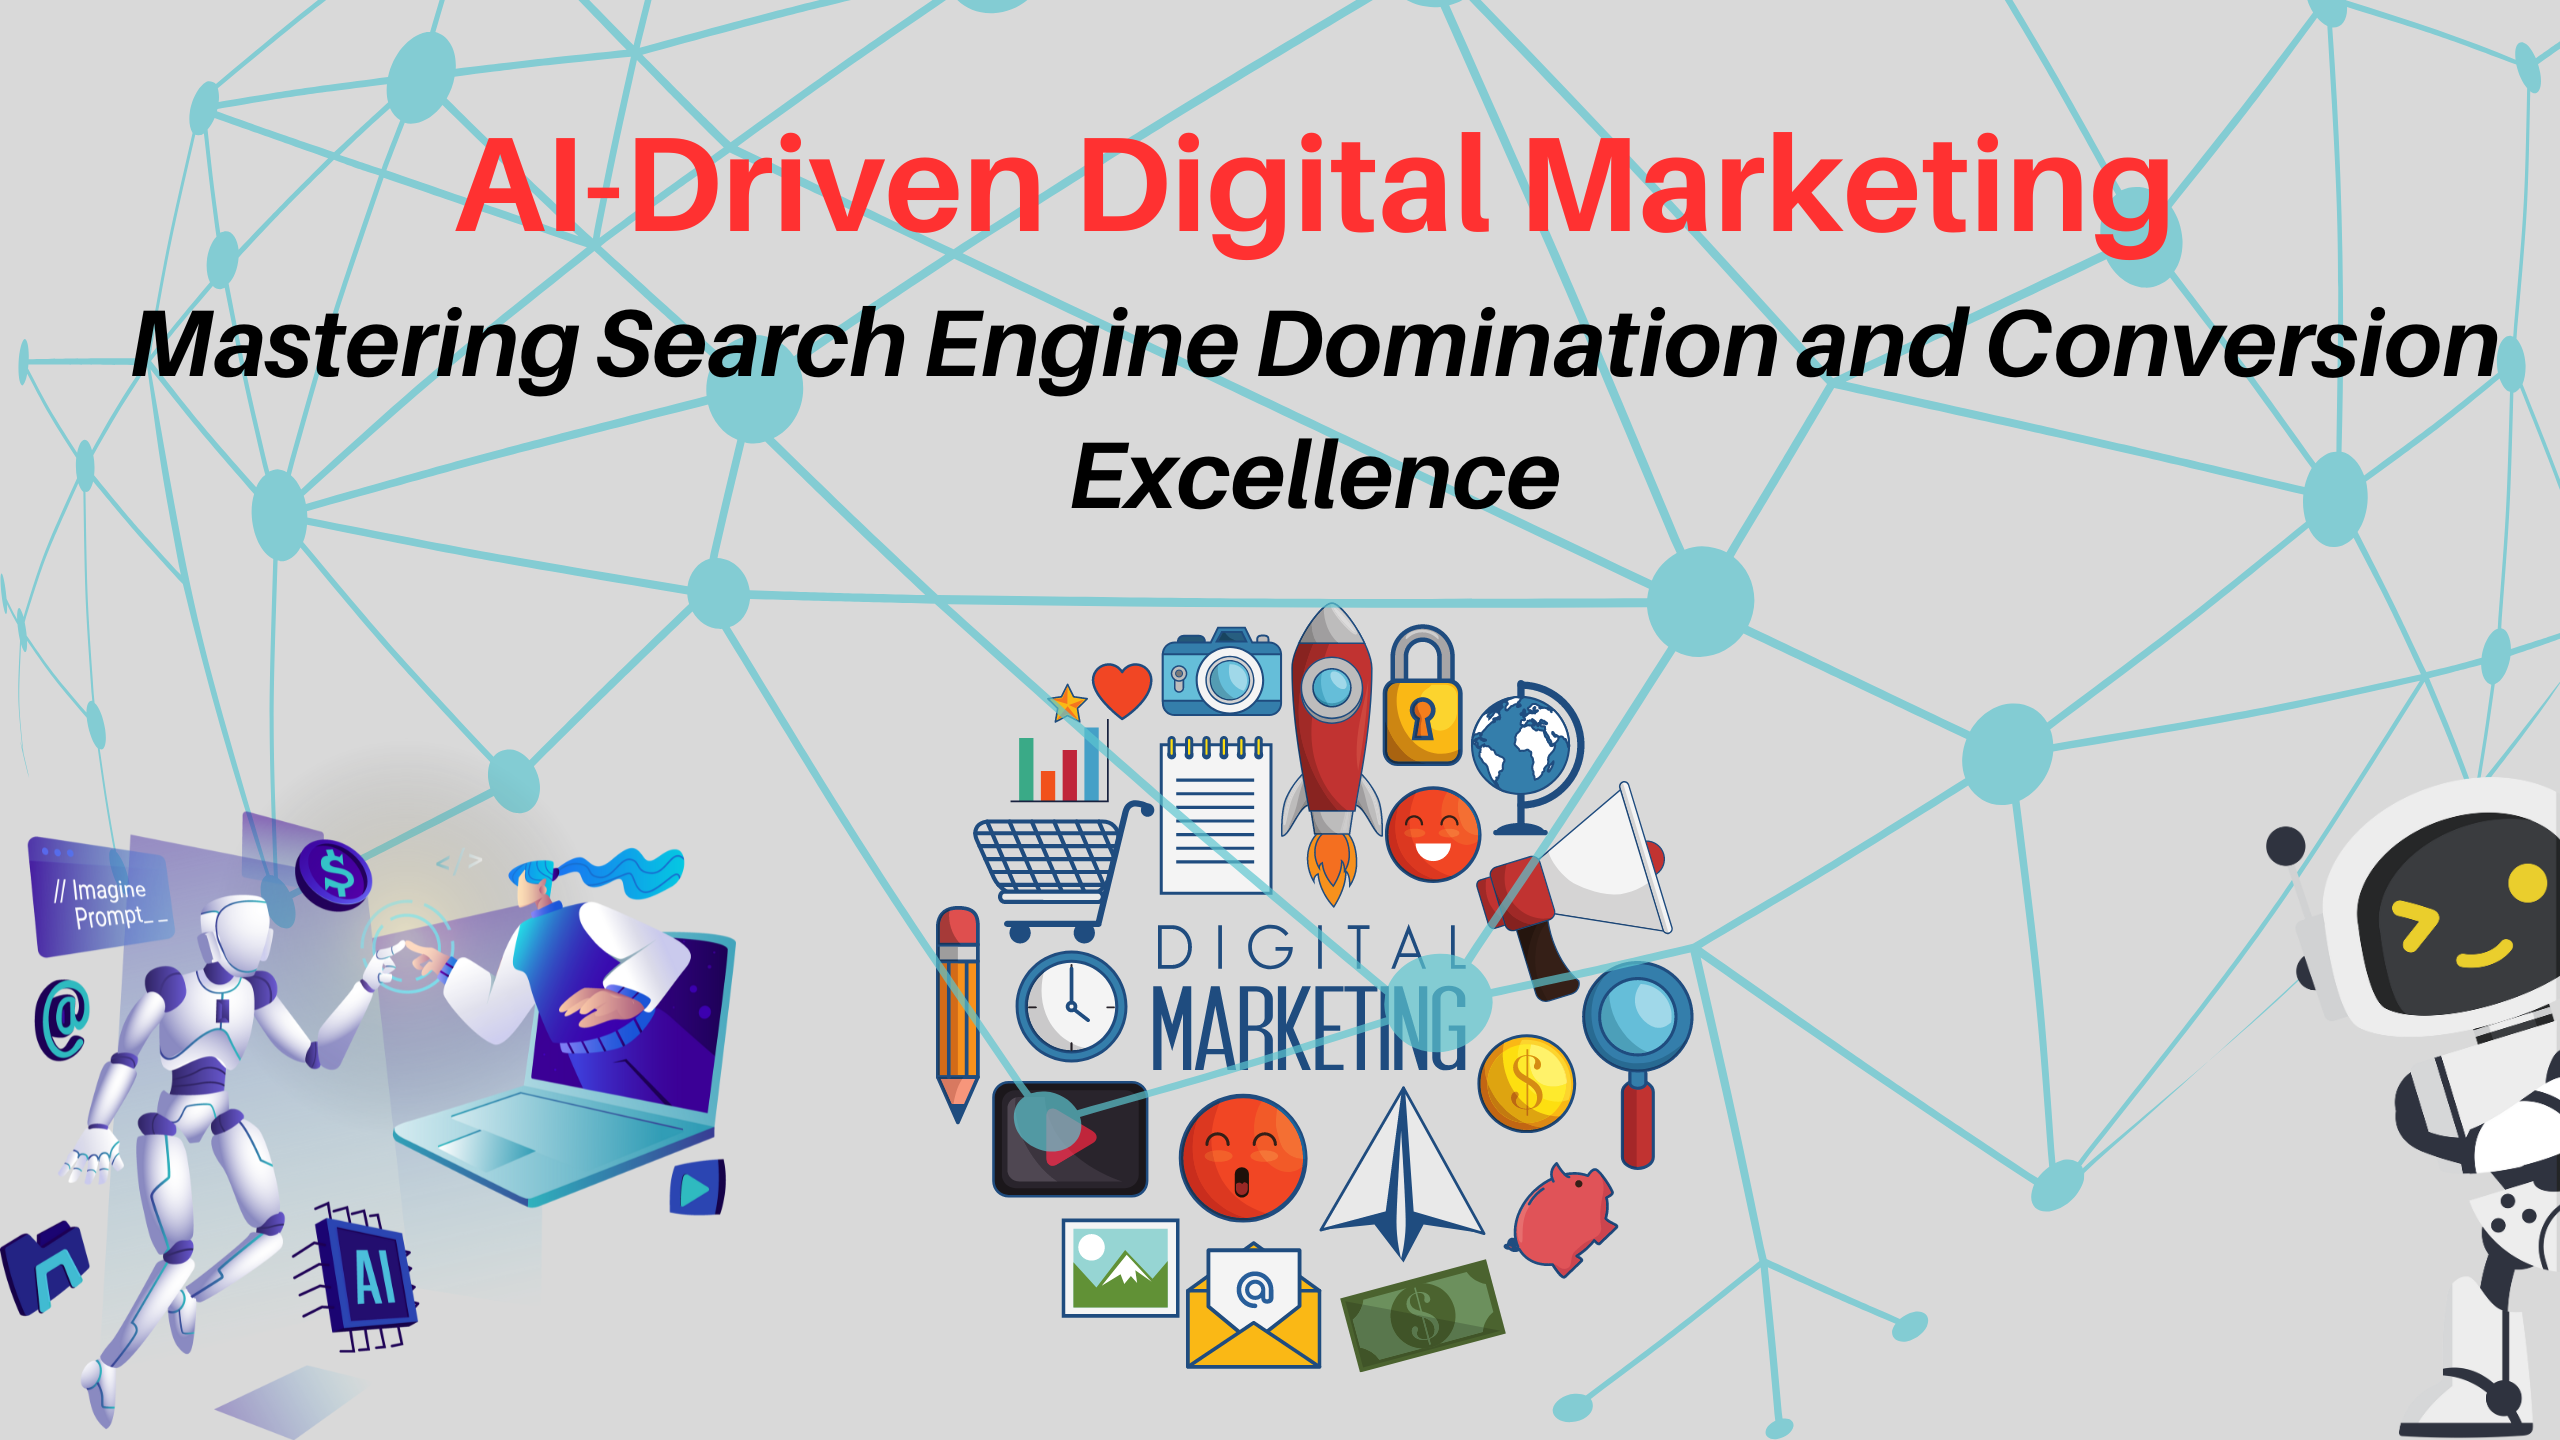 AI-Driven Digital Marketing Mastering Search Engine Domination and Conversion Excellence